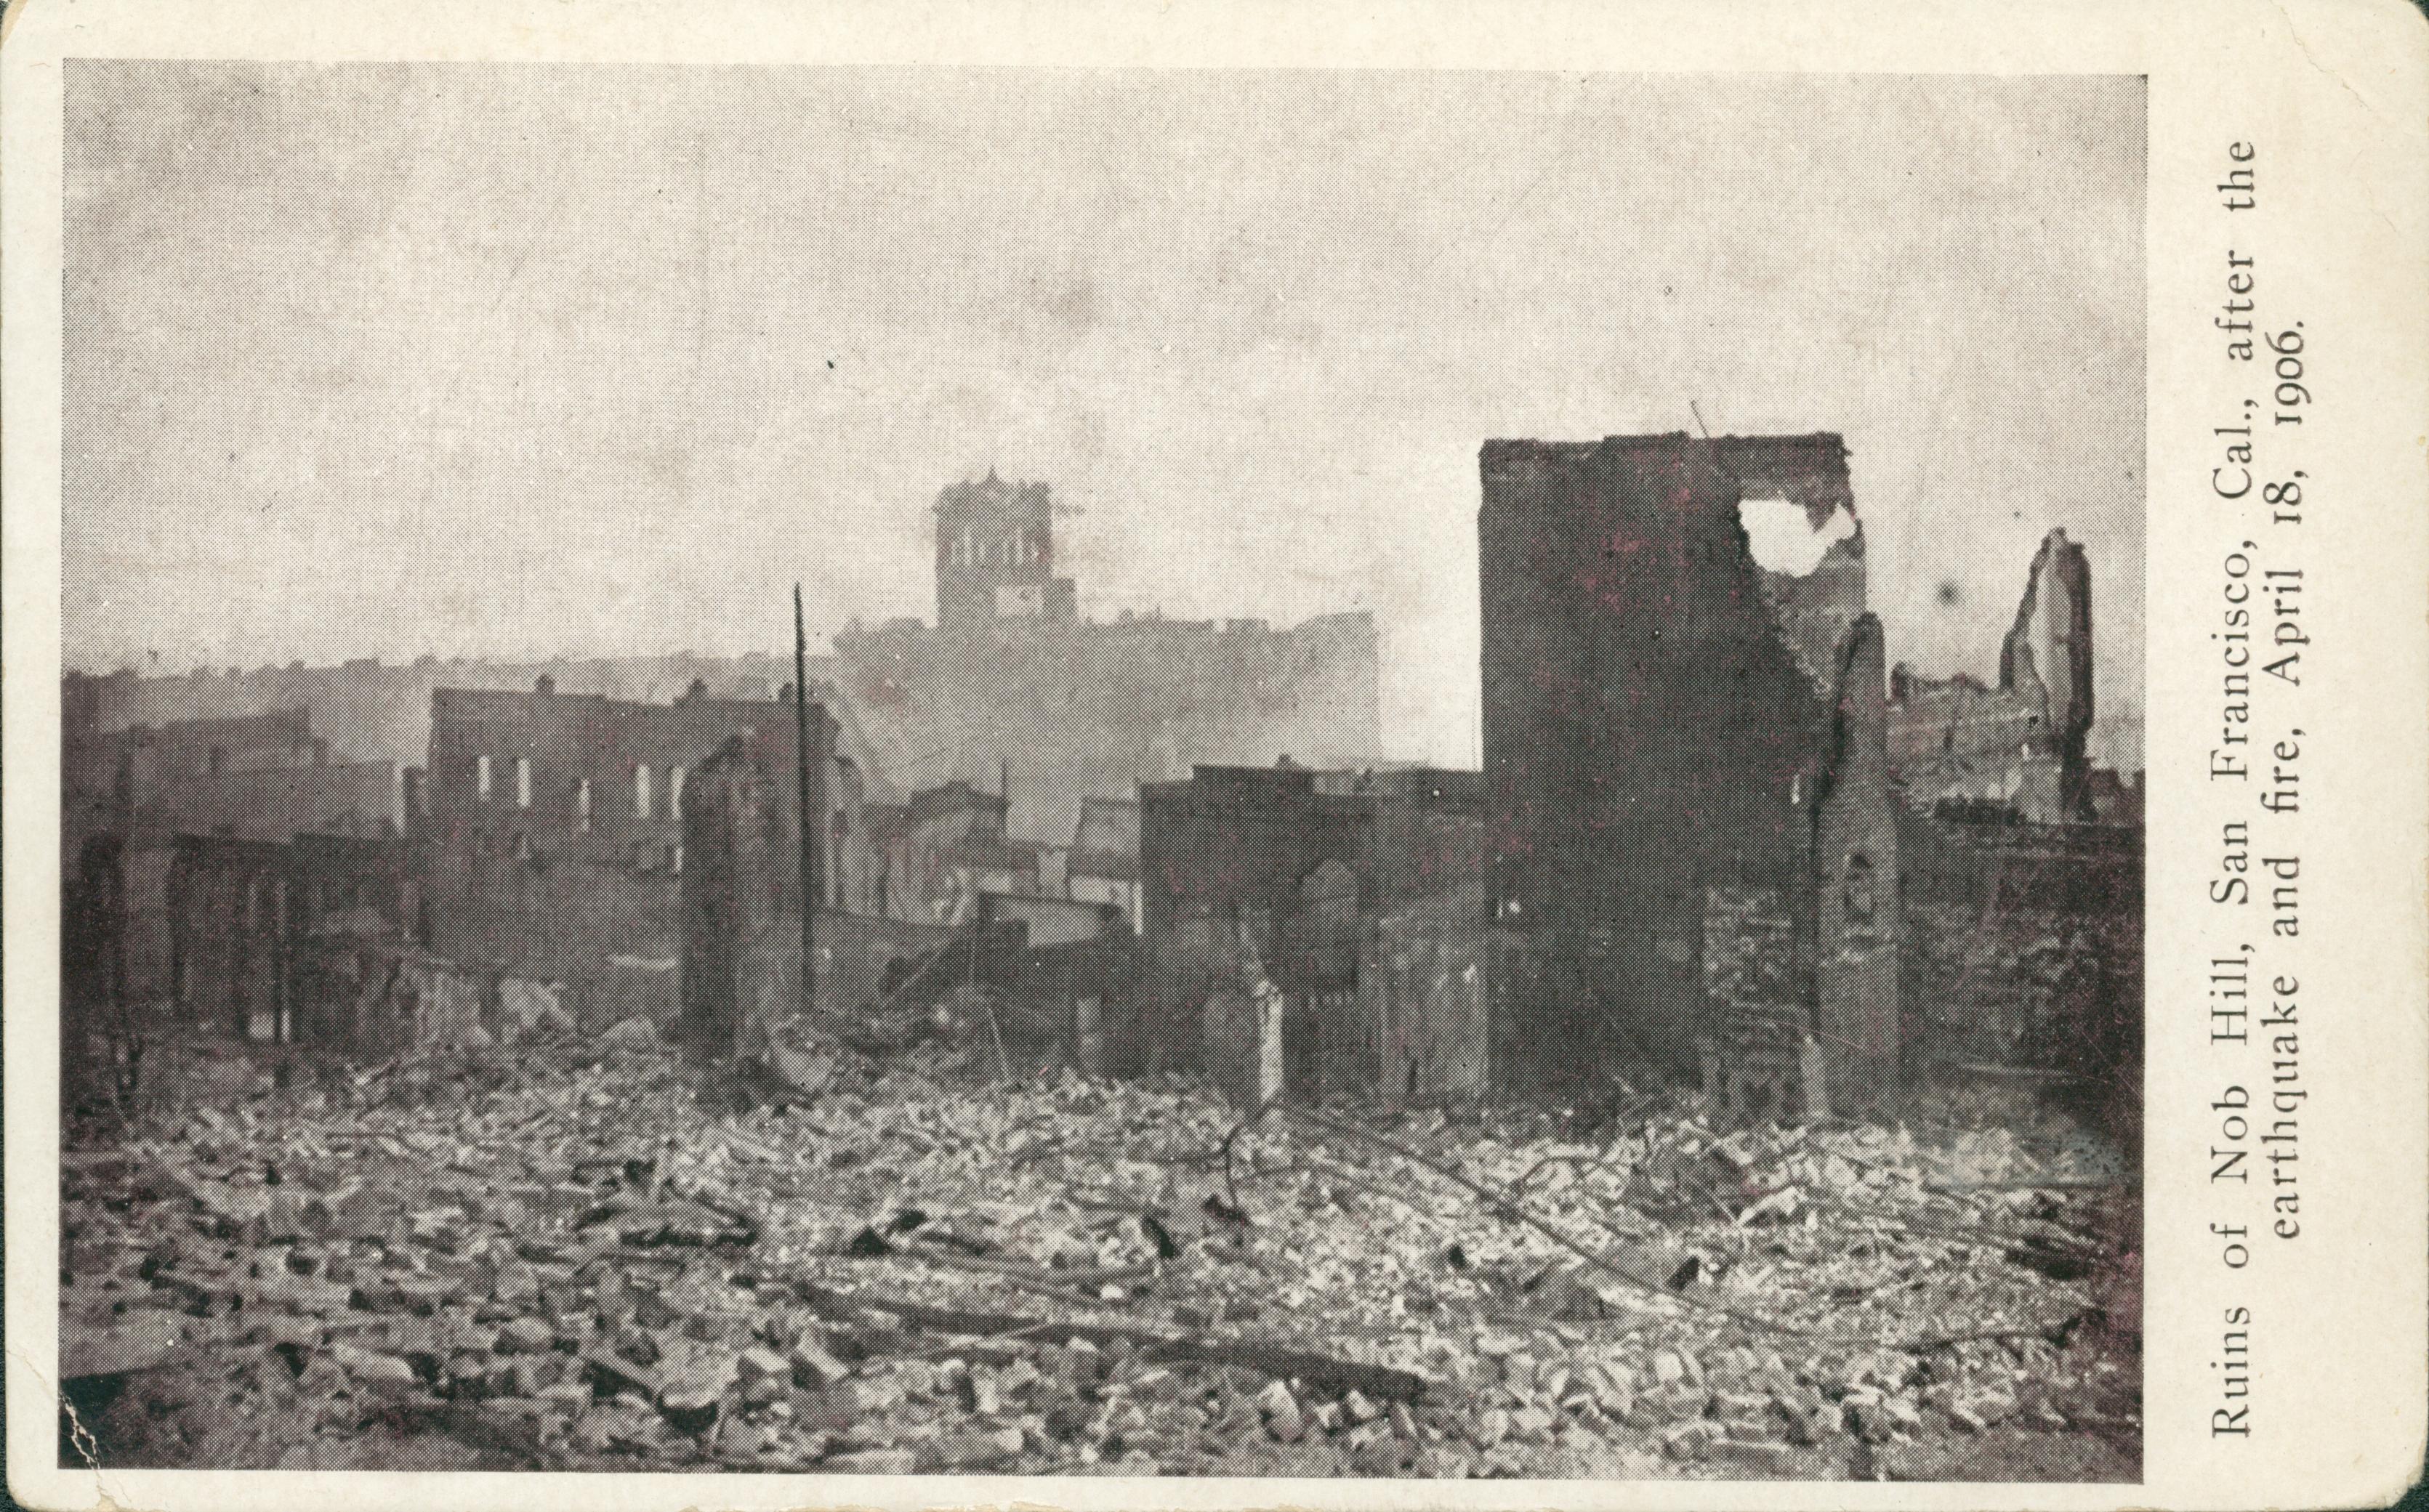 Shows the ground covered in rubble with collapsing building all around.